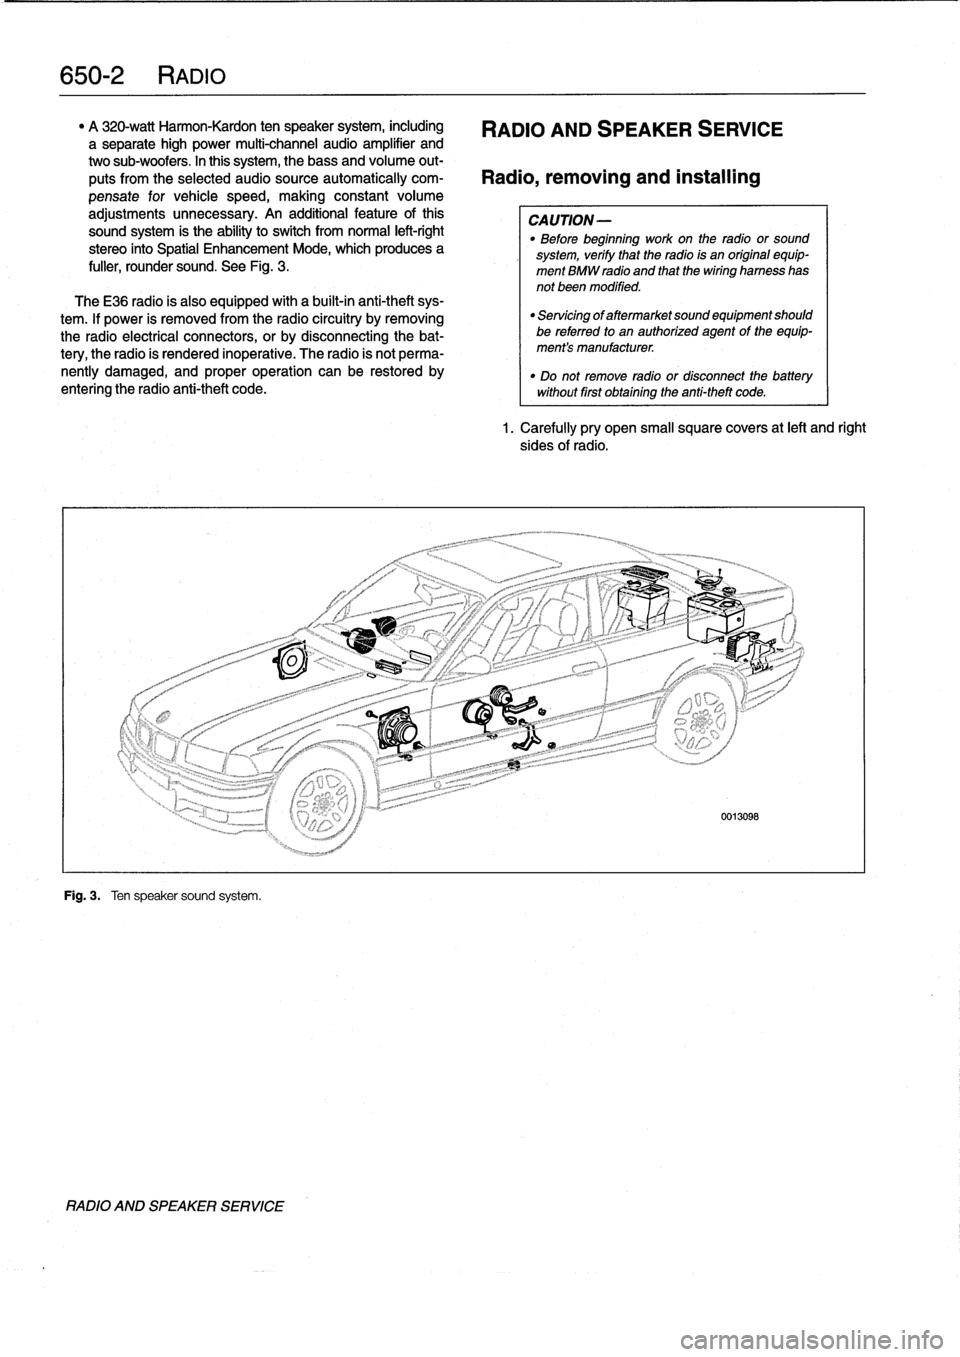 BMW M3 1996 E36 Workshop Manual 
650-2
RADIO

"
A
320-watt
Harmon-Kardon
ten
speaker
system,
including

	

RADIO
AND
SPEAKER
SERVICE
a
separate
high
power
multi-channel
audio
amplifier
and
two
sub-woofers
.
In
this
system,
thebass
a